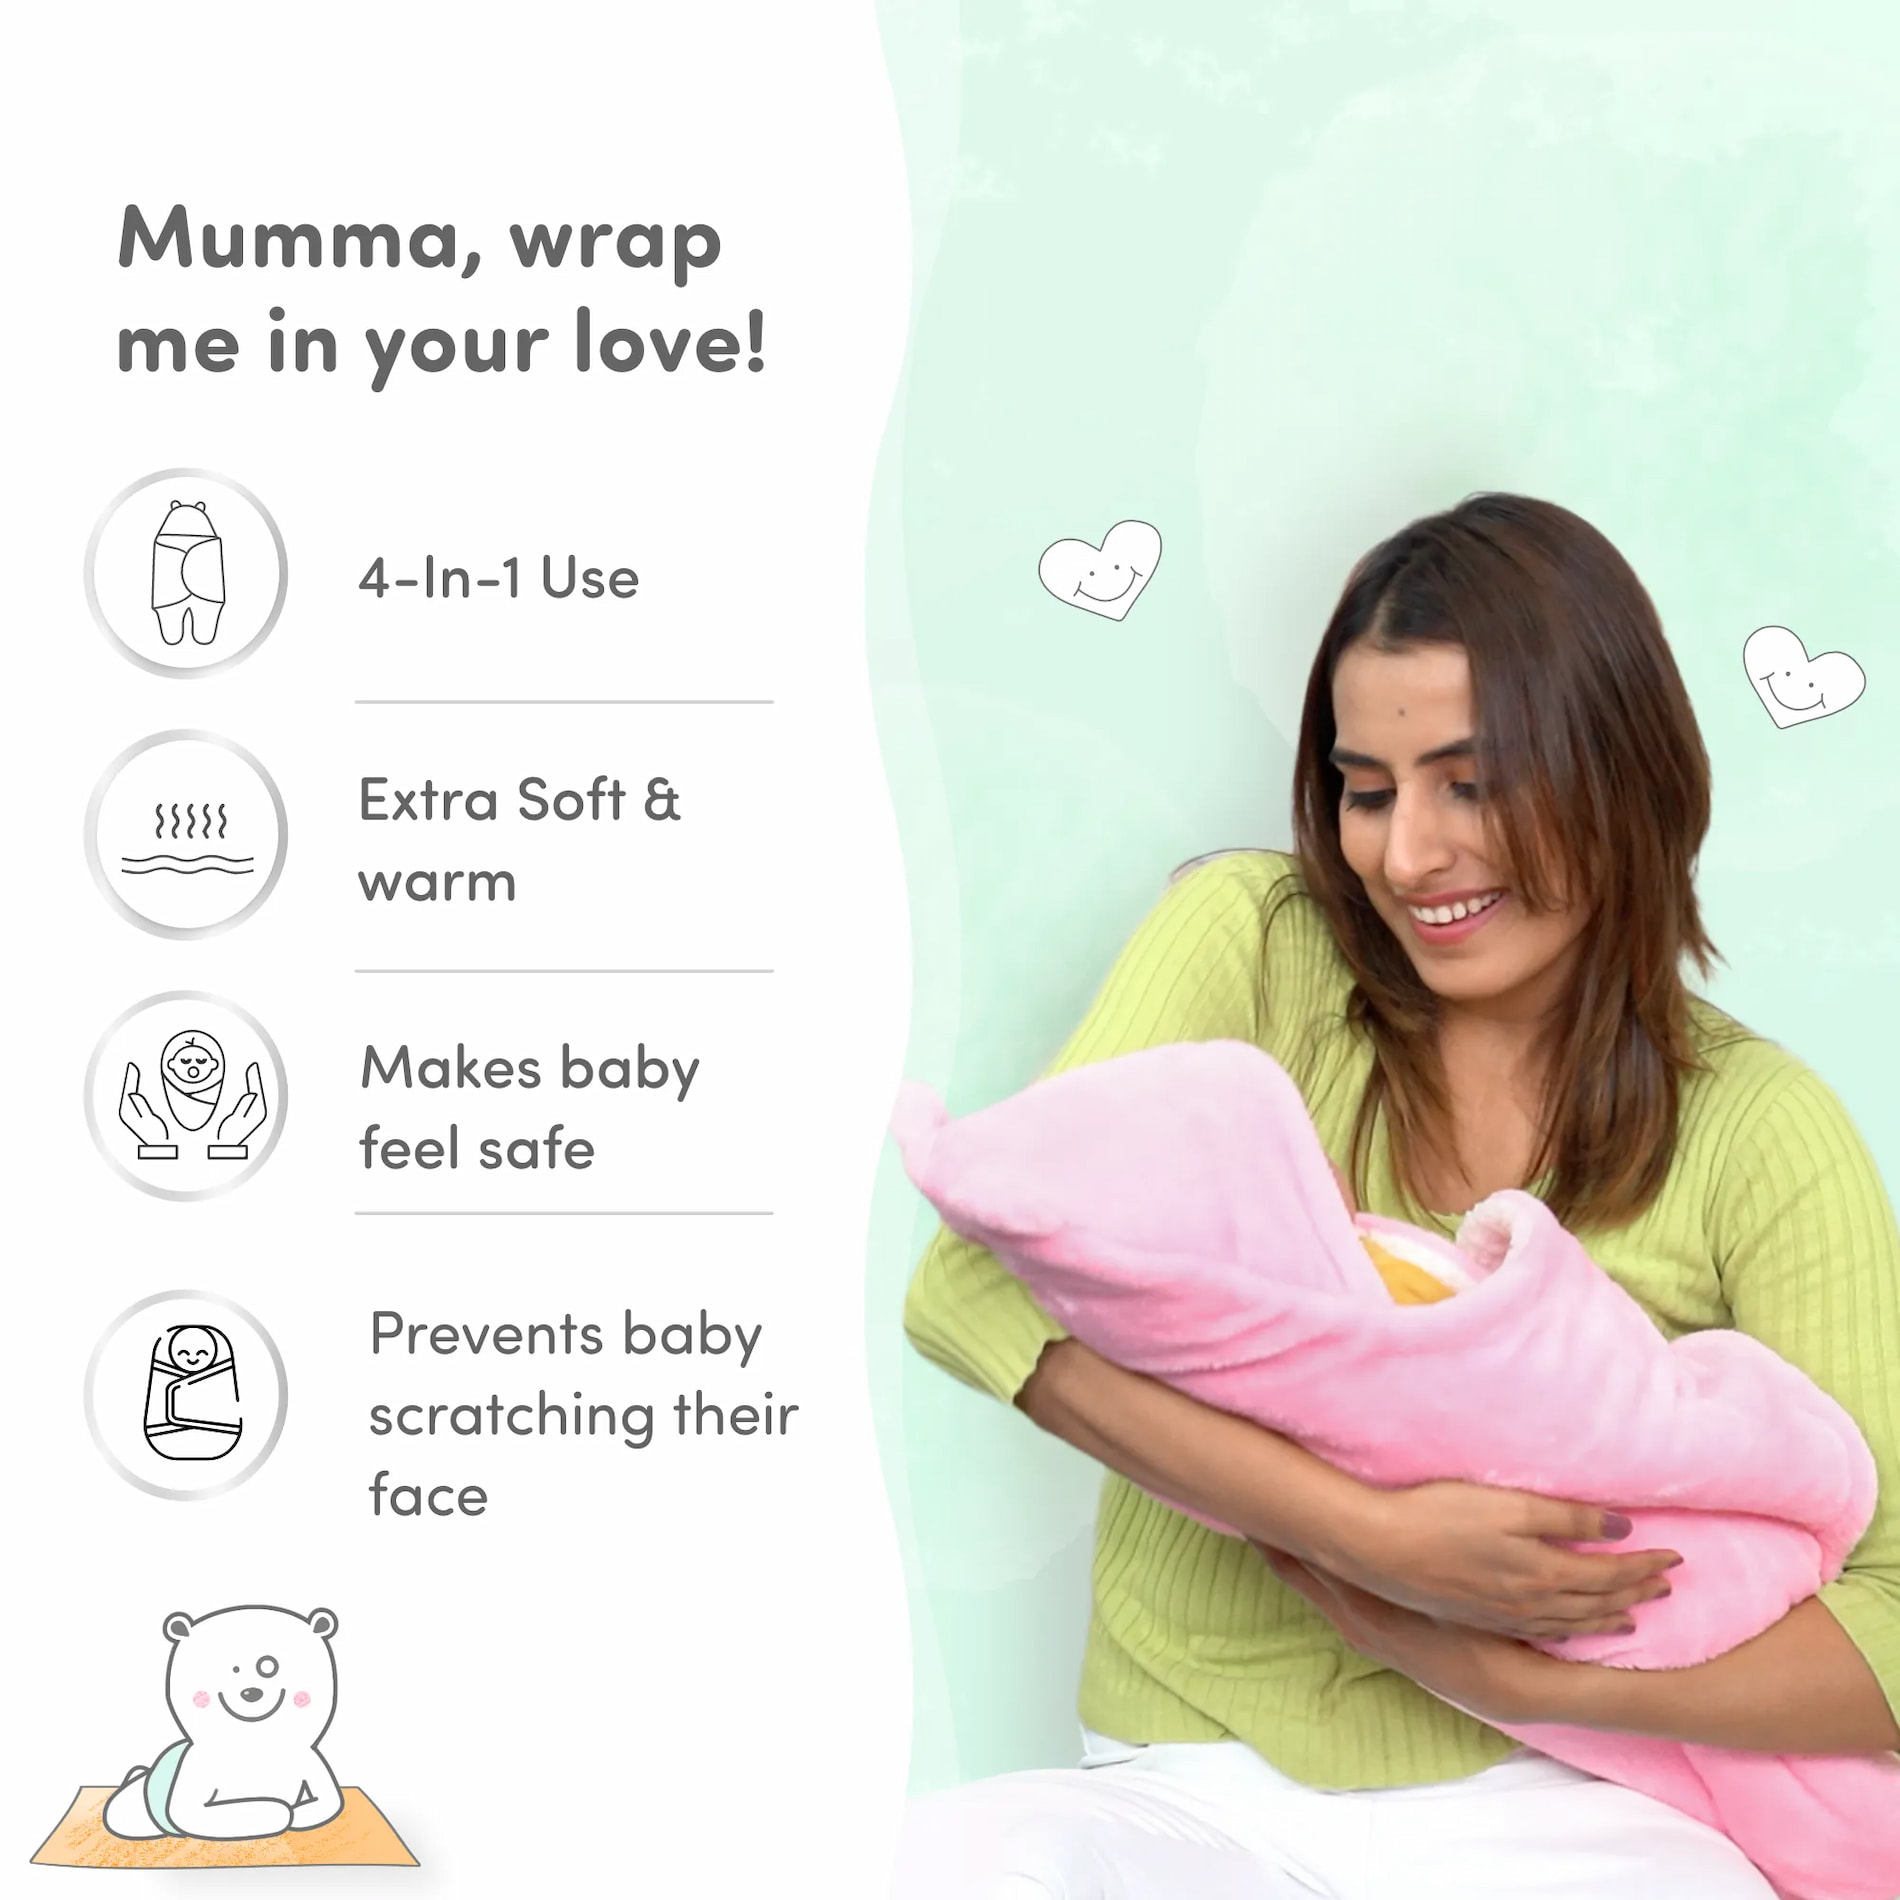 Baby Wrapper for New Born | Baby Swaddling Wrapper | 4-in-1 All Season AC Blanket cum Sleeping Bag for Baby 0-6 Months - Mint Green & Light Brown